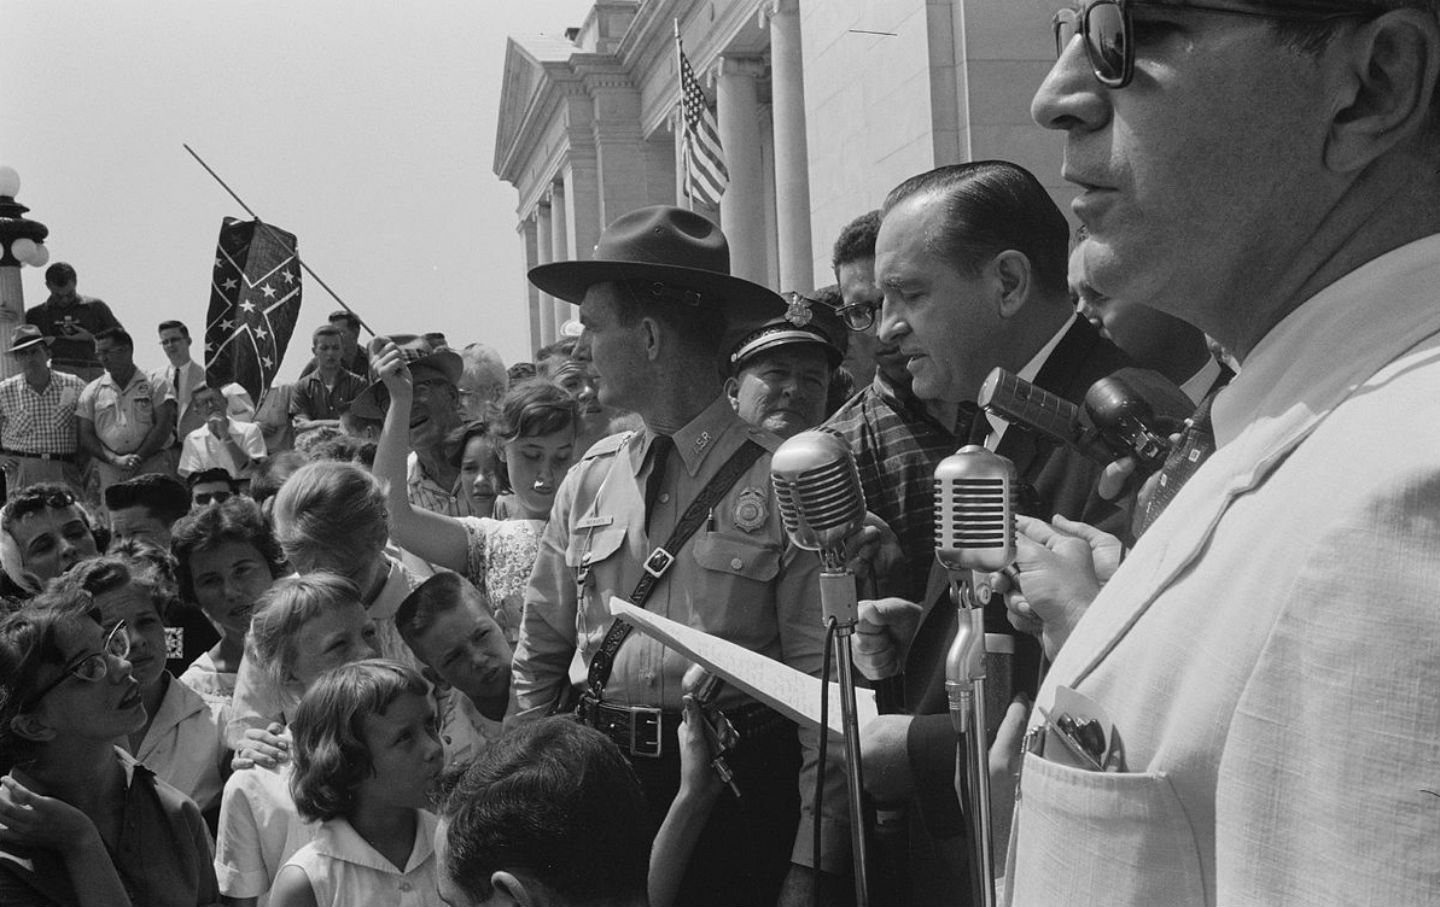 September 4, 1958: Arkansas Governor Calls Out the National Guard to Prevent Public School Integration